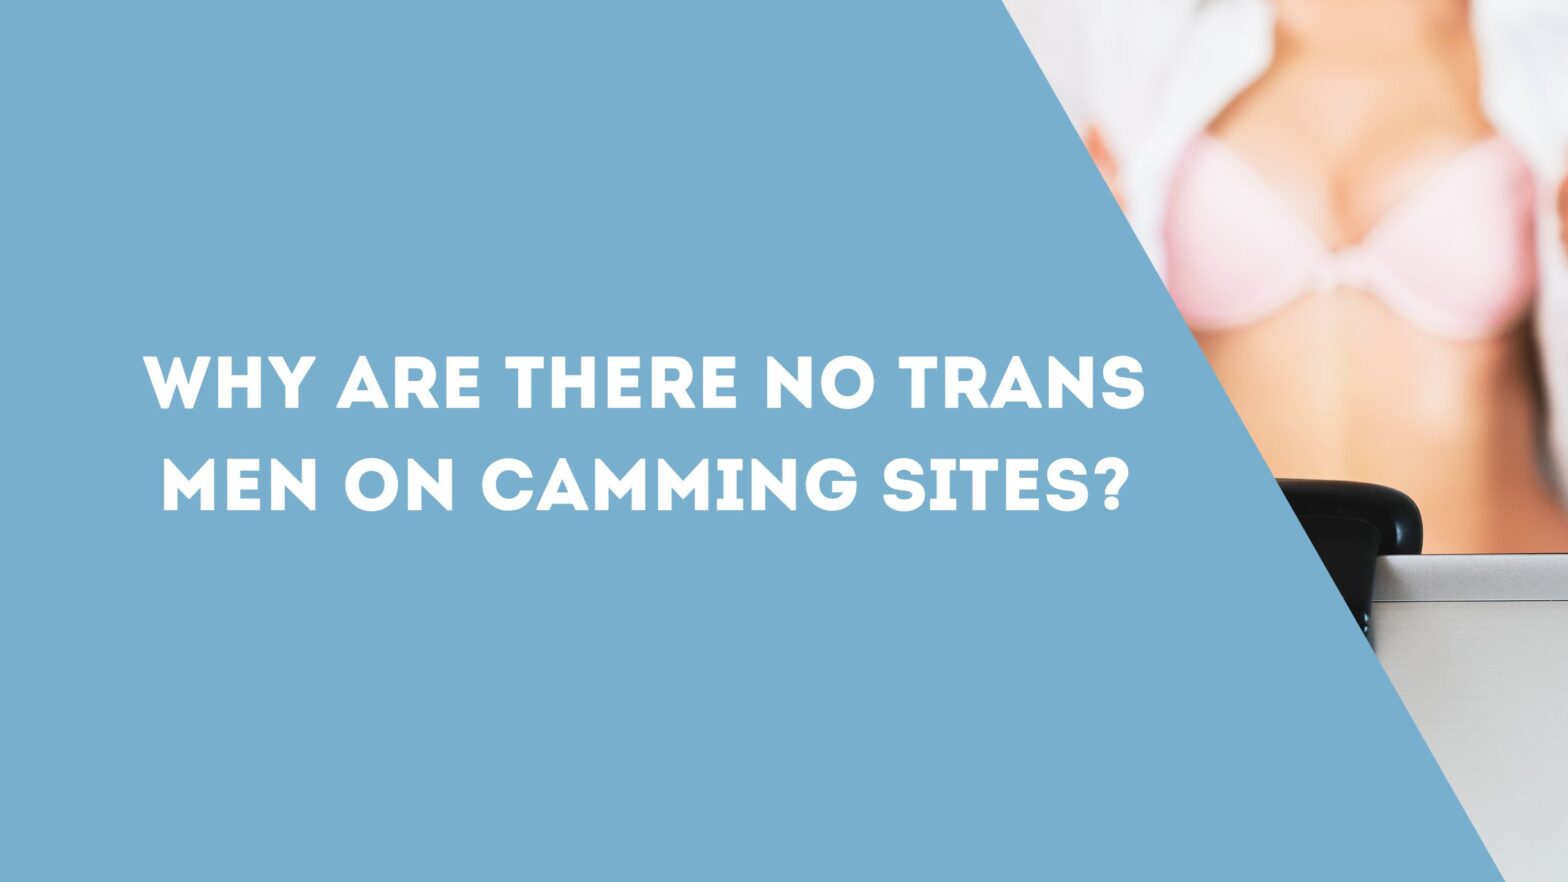 Why Are There No Trans Men on Camming Sites?